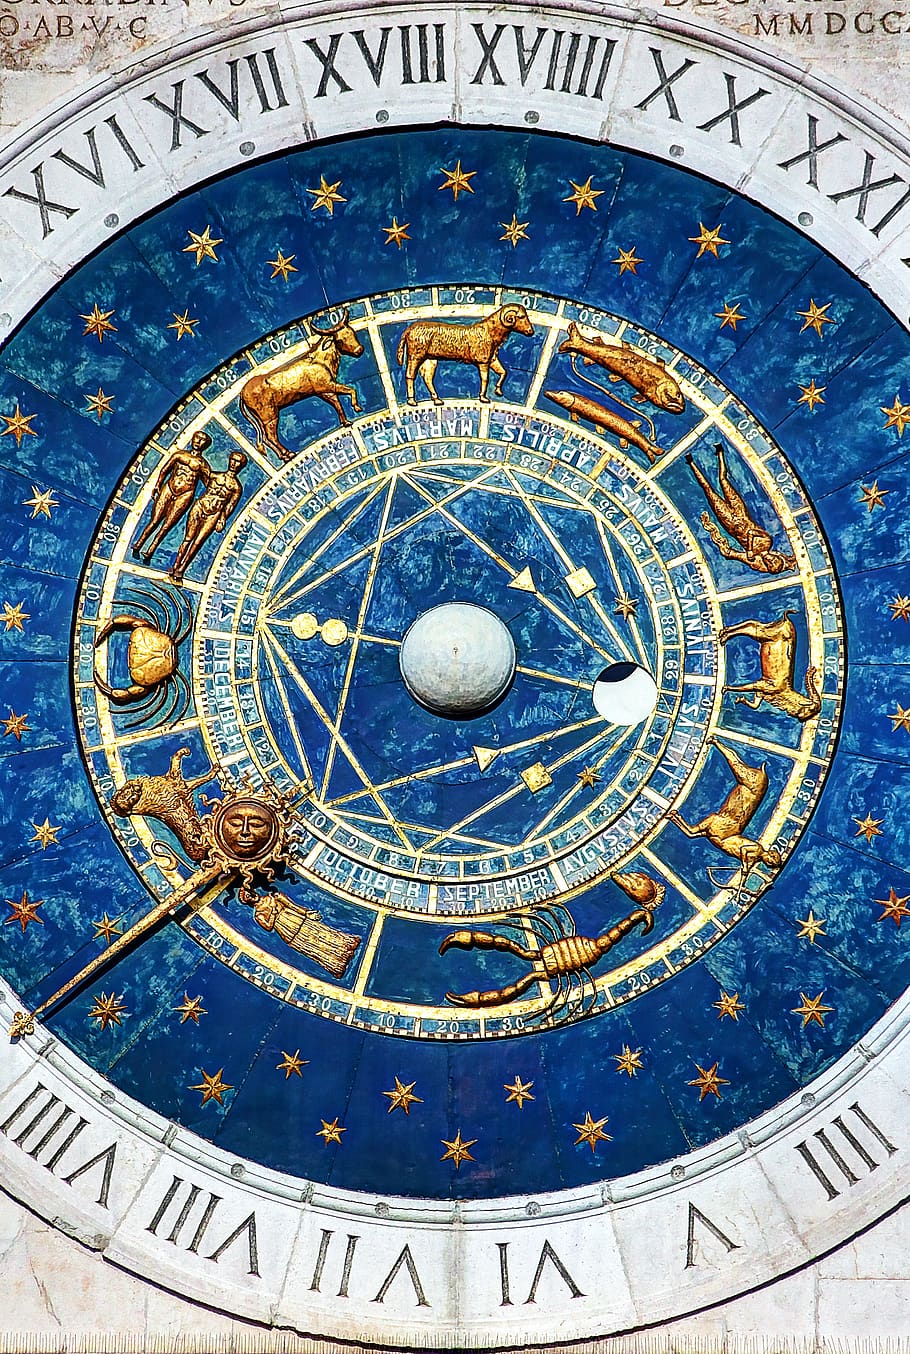 padova, watch, torre, italy, time, the zodiac, astrology sign, space, clock, roman numeral